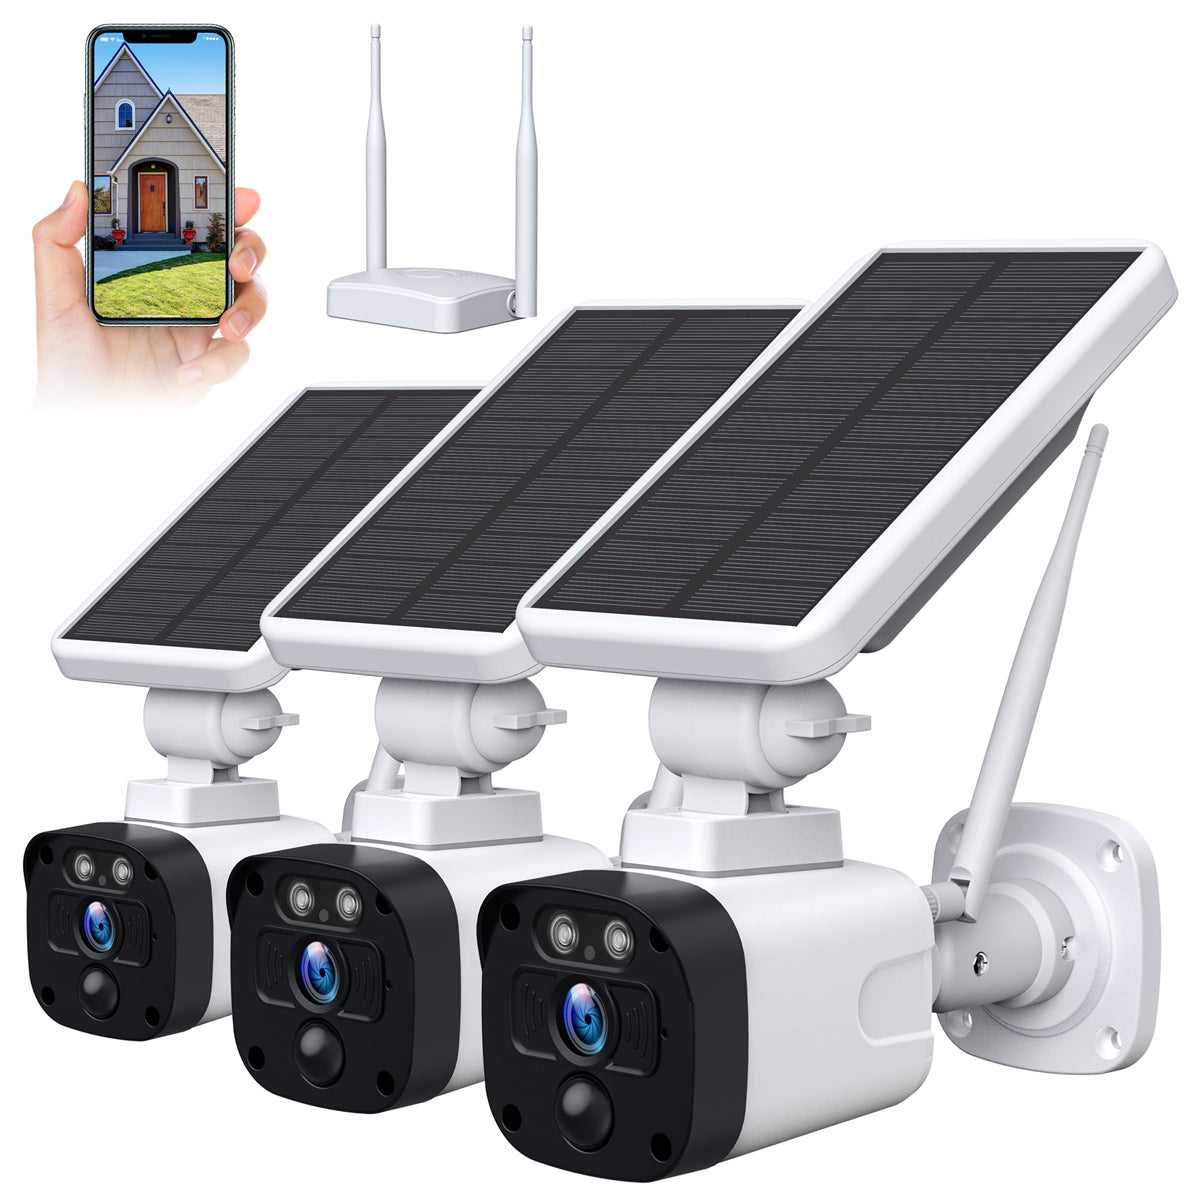 Toguard SC02/SC14 3MP Solar Wireless Outdoor Security Camera System ( Include Base Station)